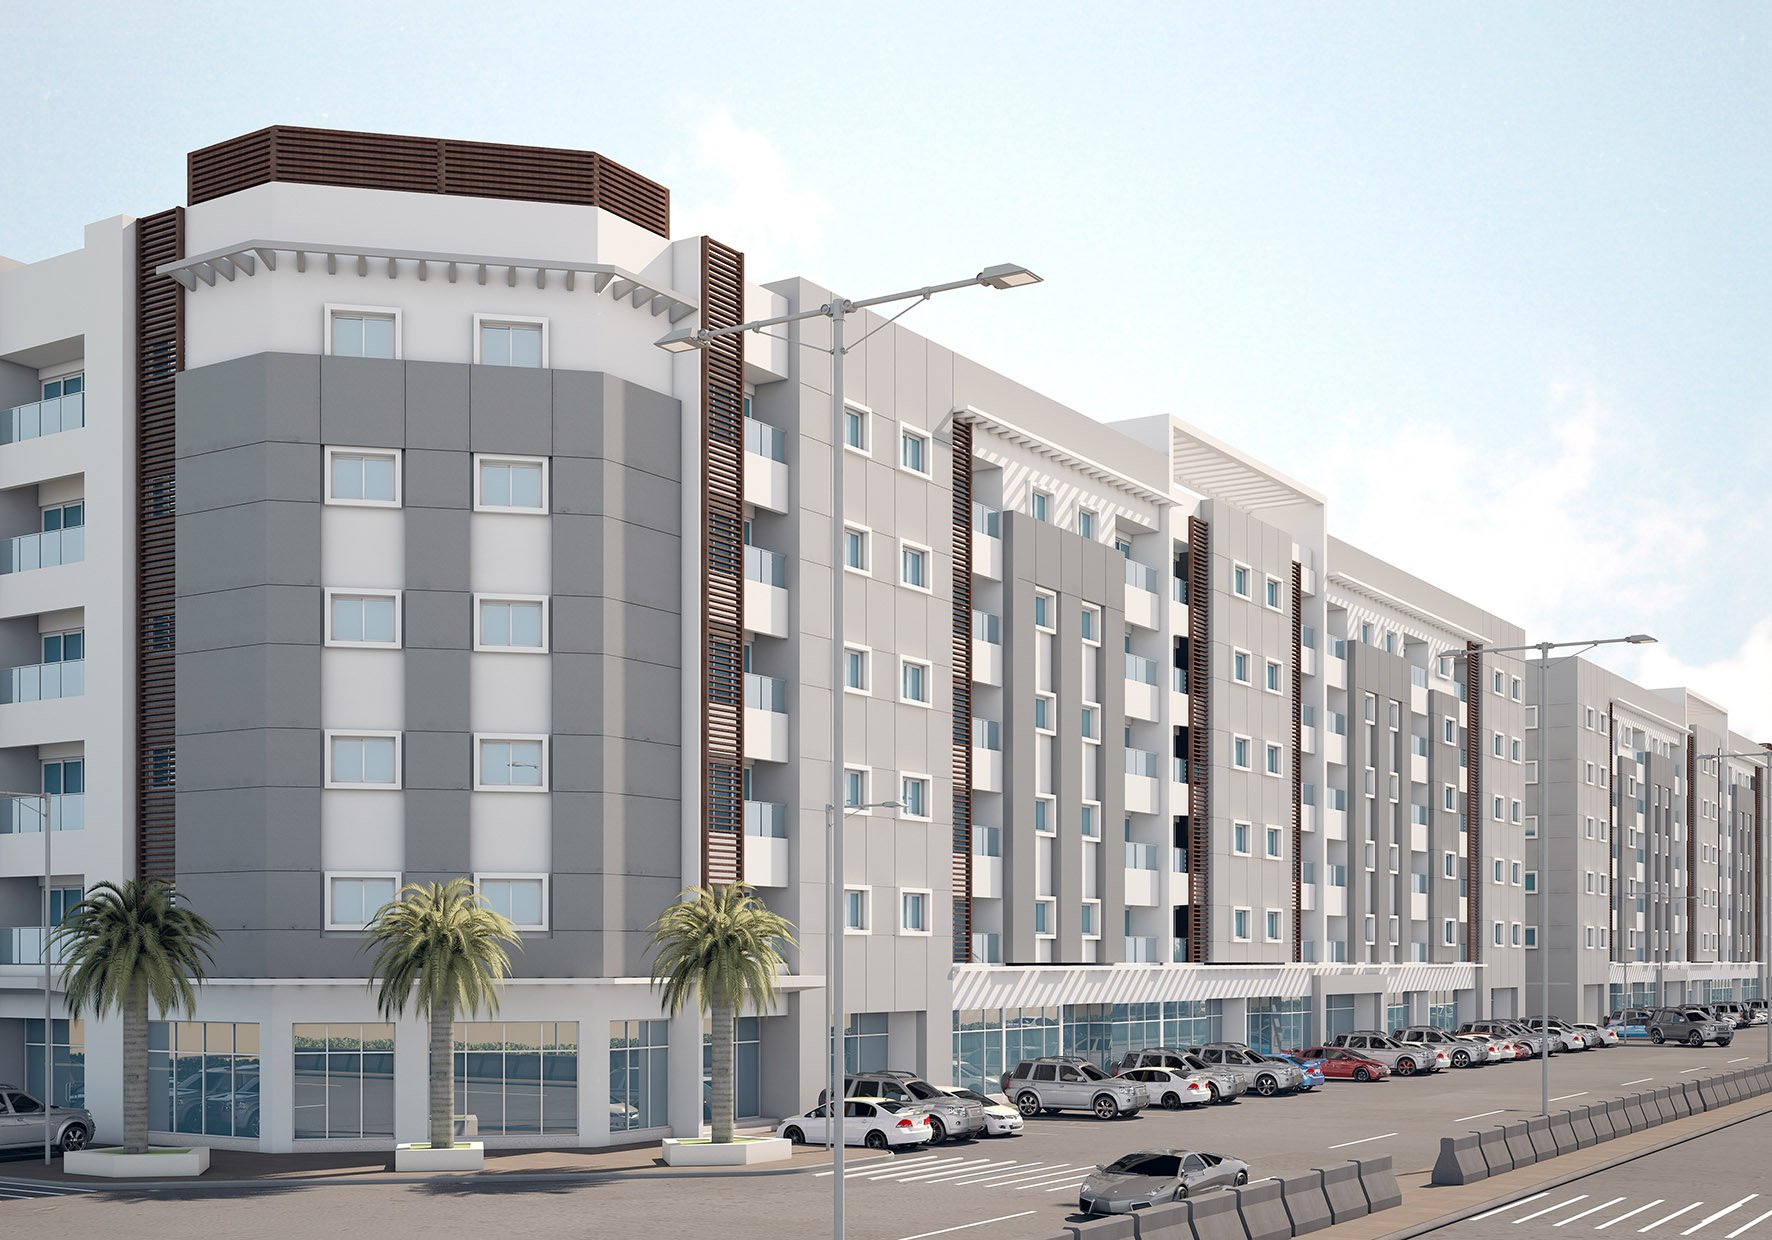 AL WAAB RESIDENTIAL COMPLEX - APARTMENT BUILDING